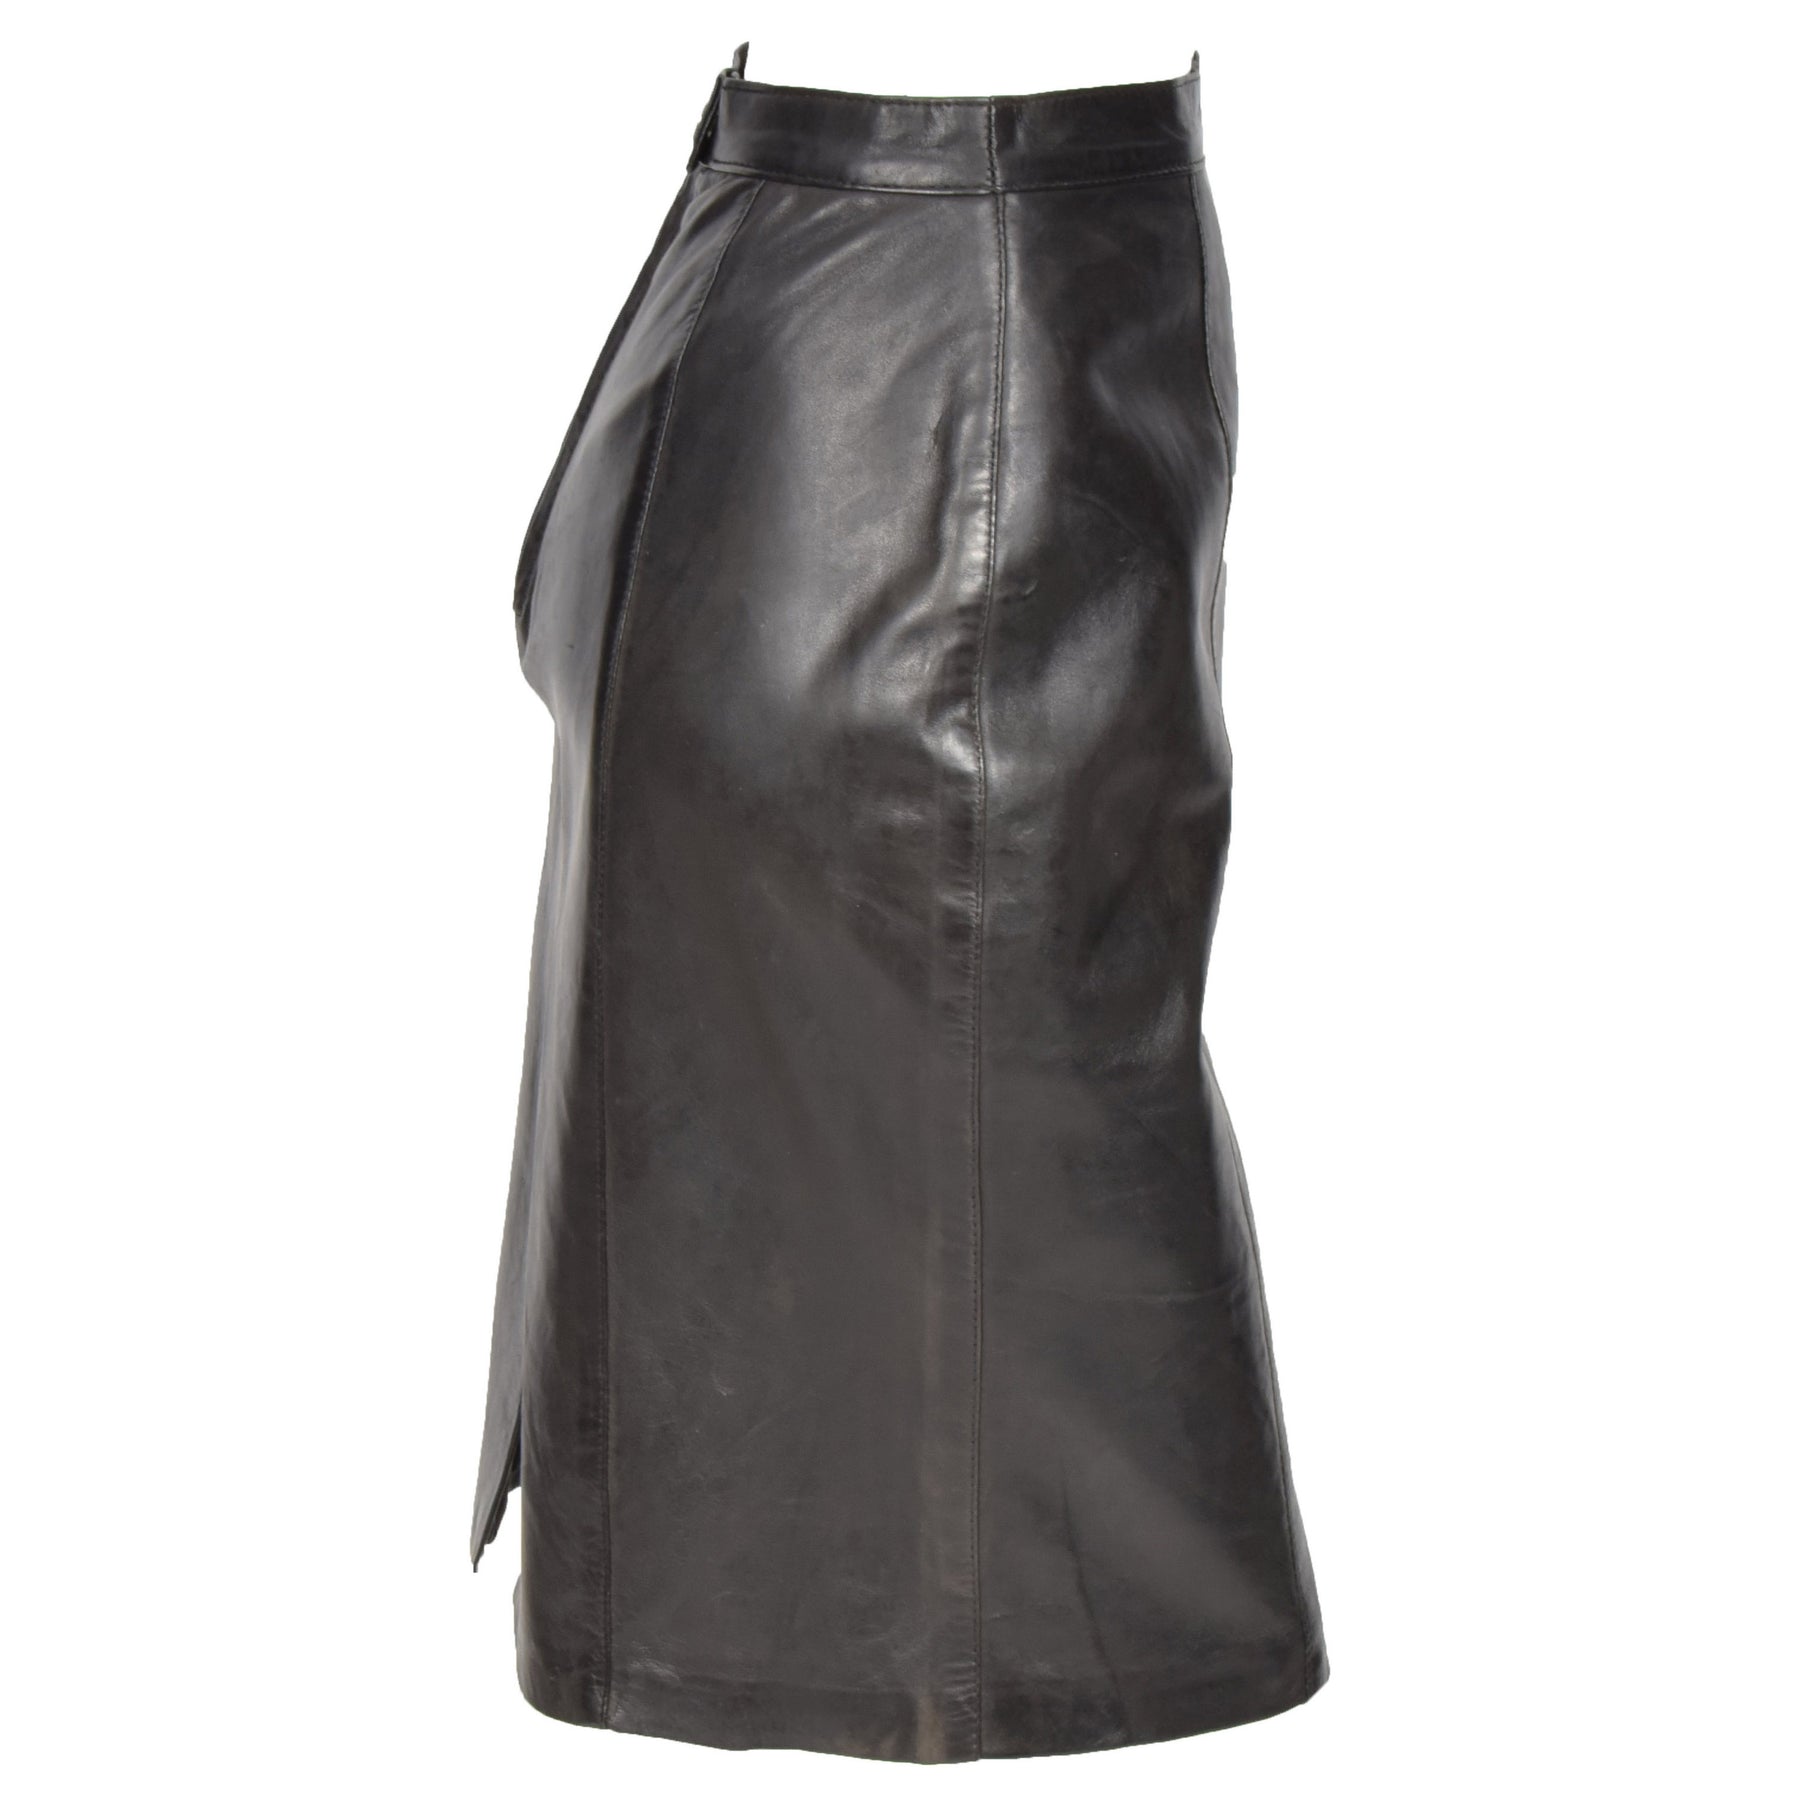 Styling Right with Ladies Leather Skirts